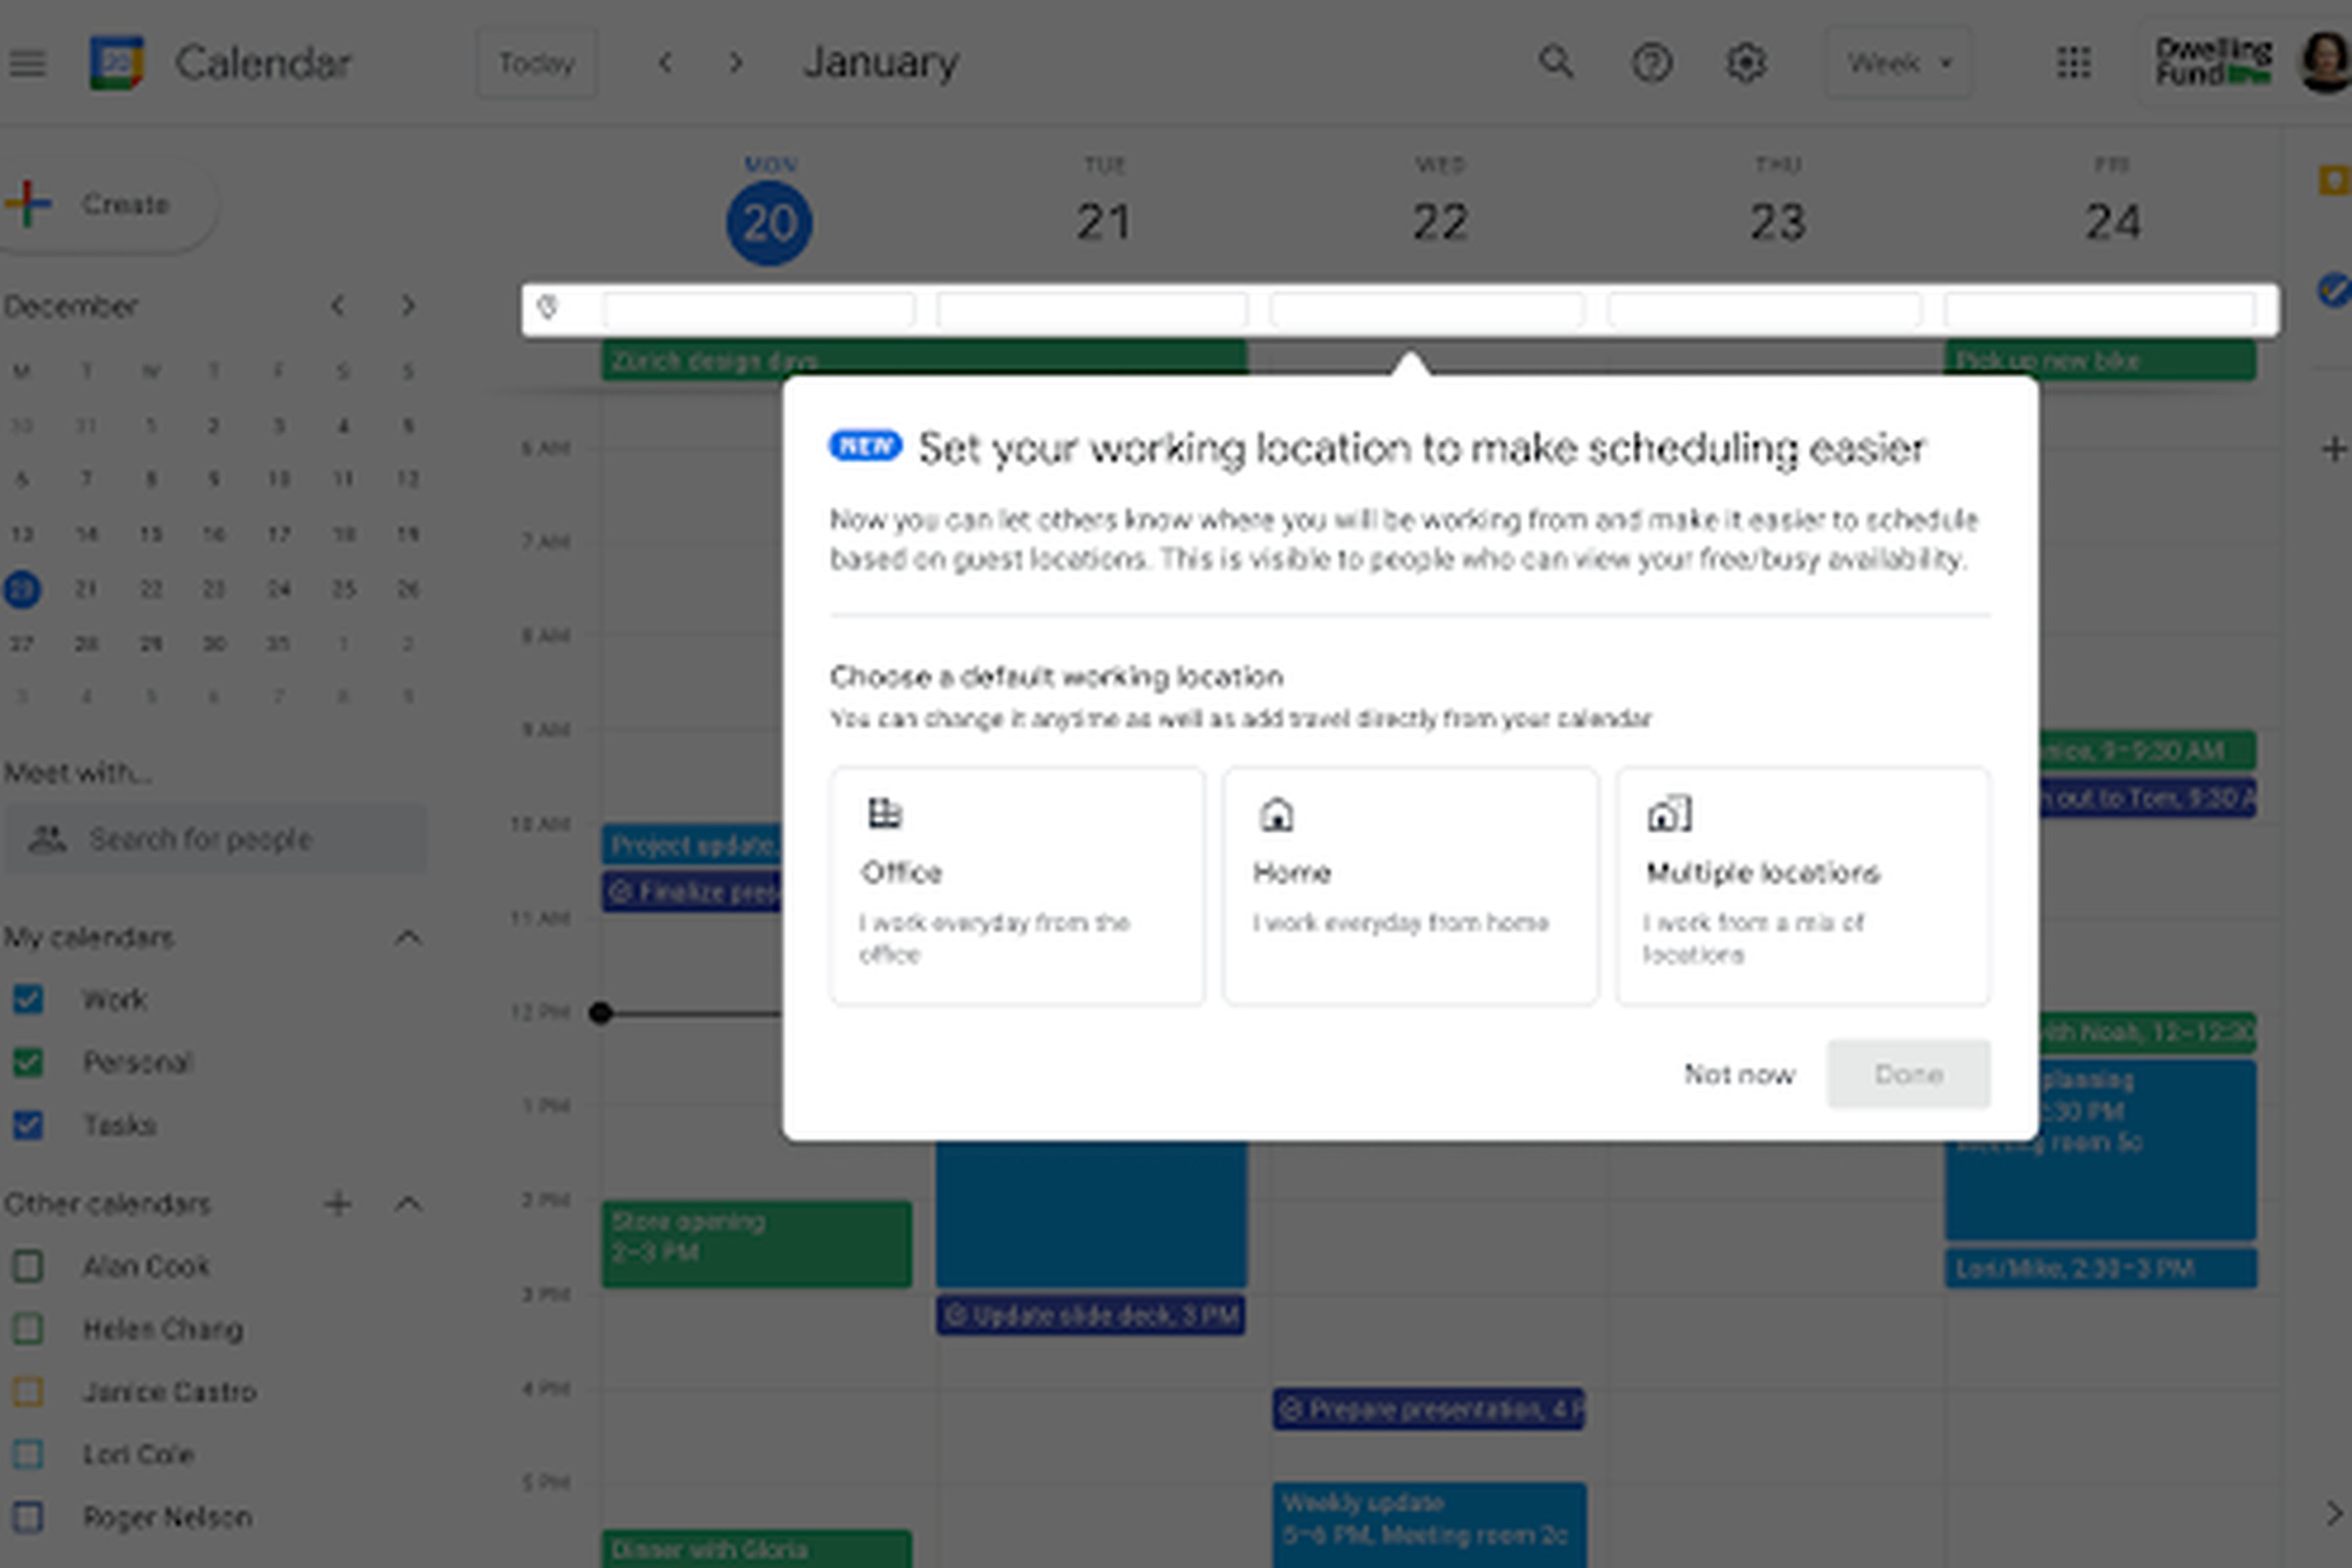 “Set your working location to make scheduling easier.”